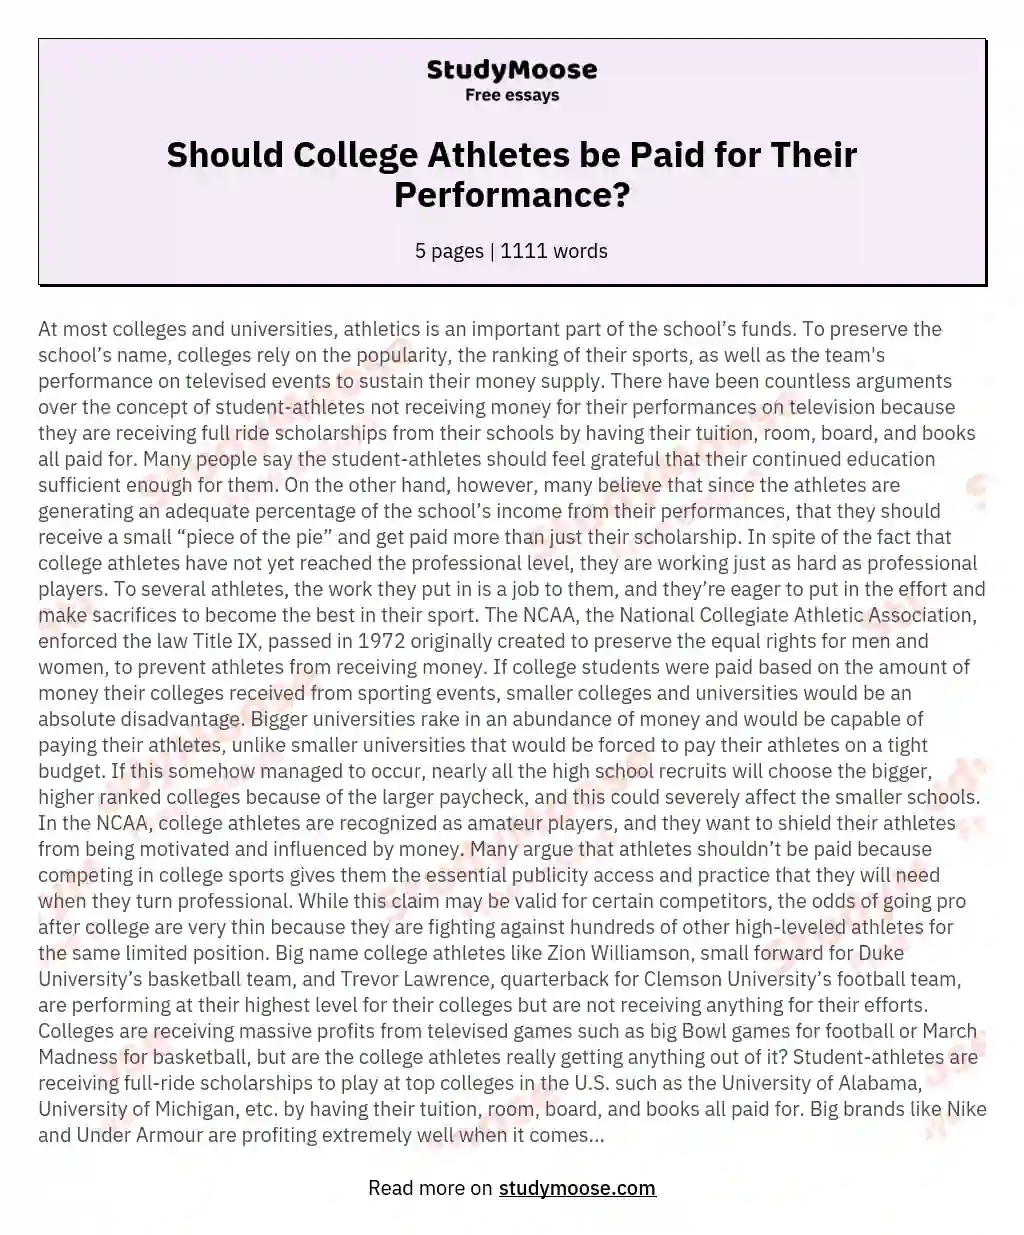 Should College Athletes be Paid for Their Performance? essay